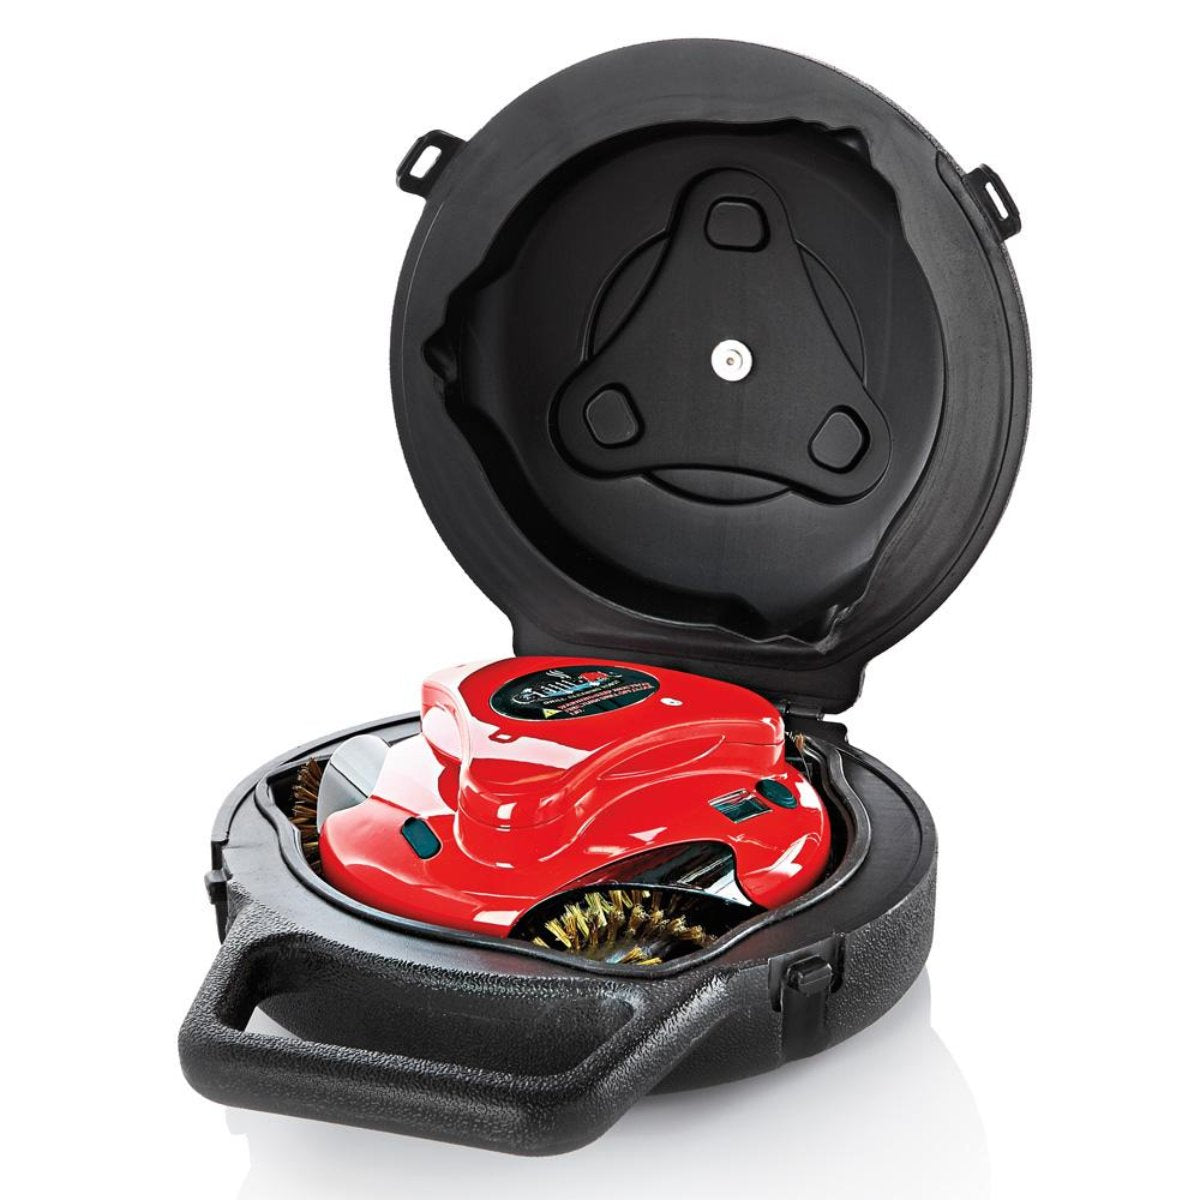 Red Grillbot Automatic grill cleaner carrying case